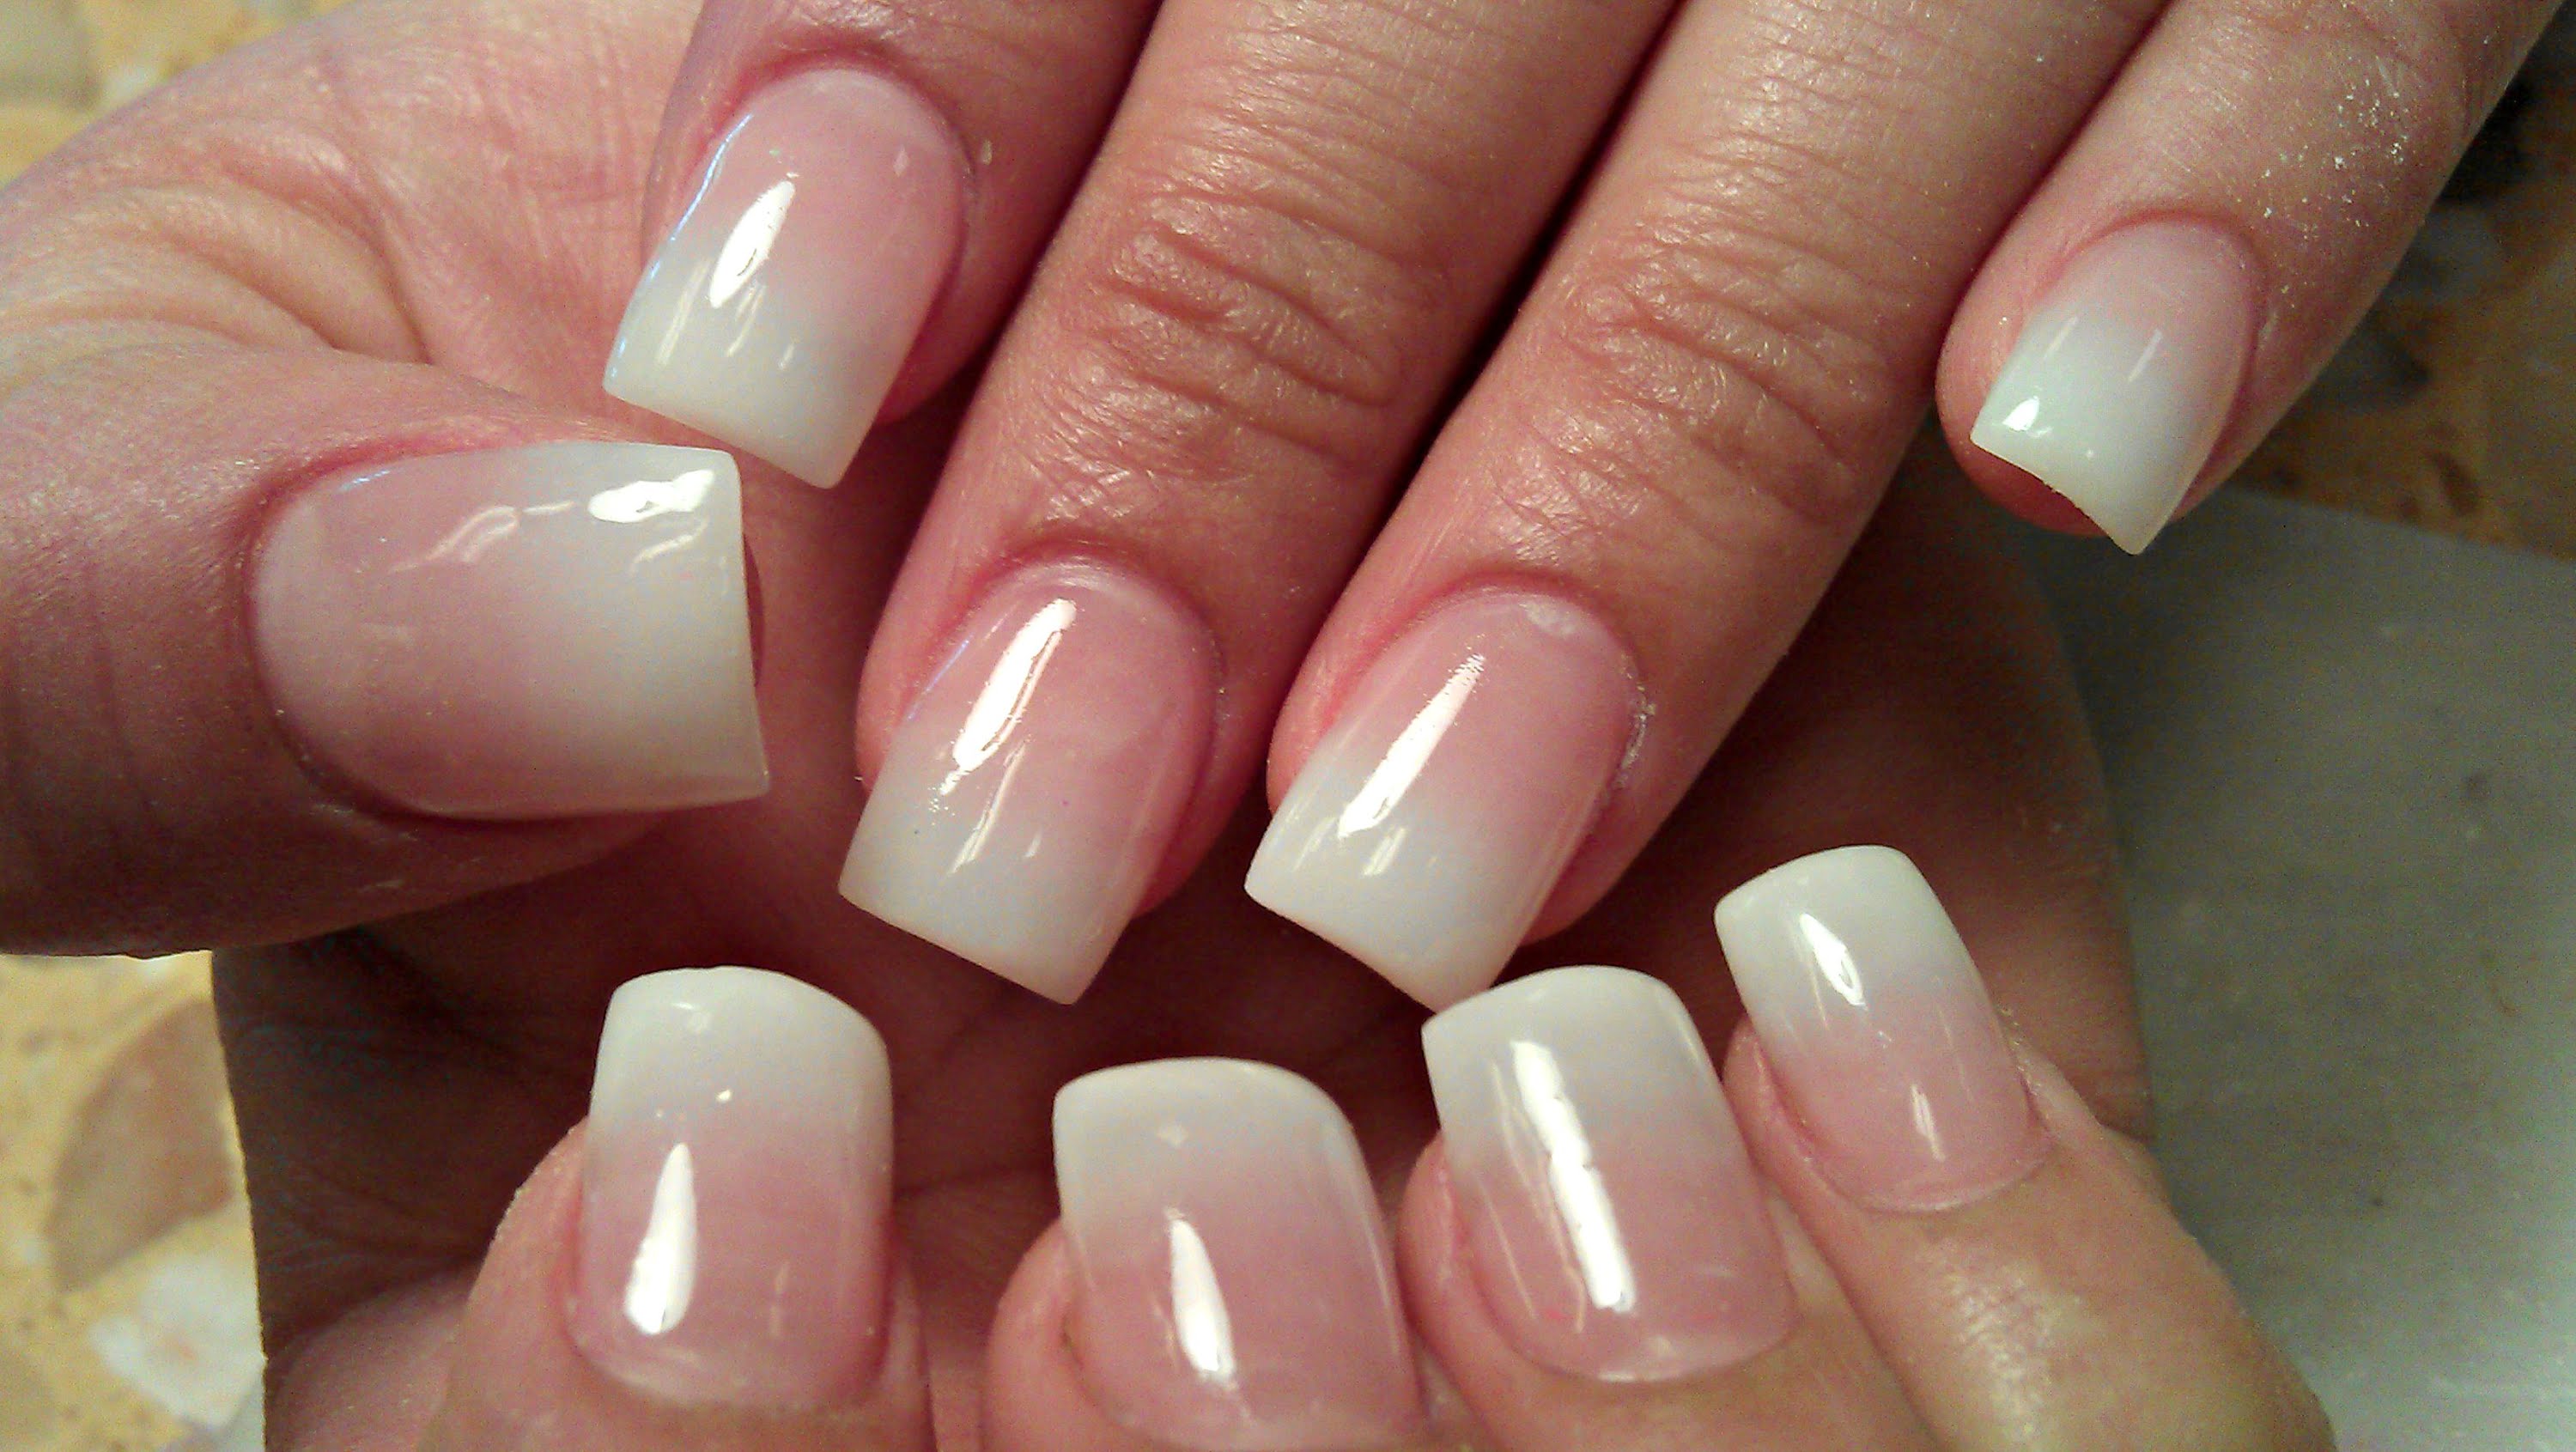 6. White Tip Ombre Nails - wide 3